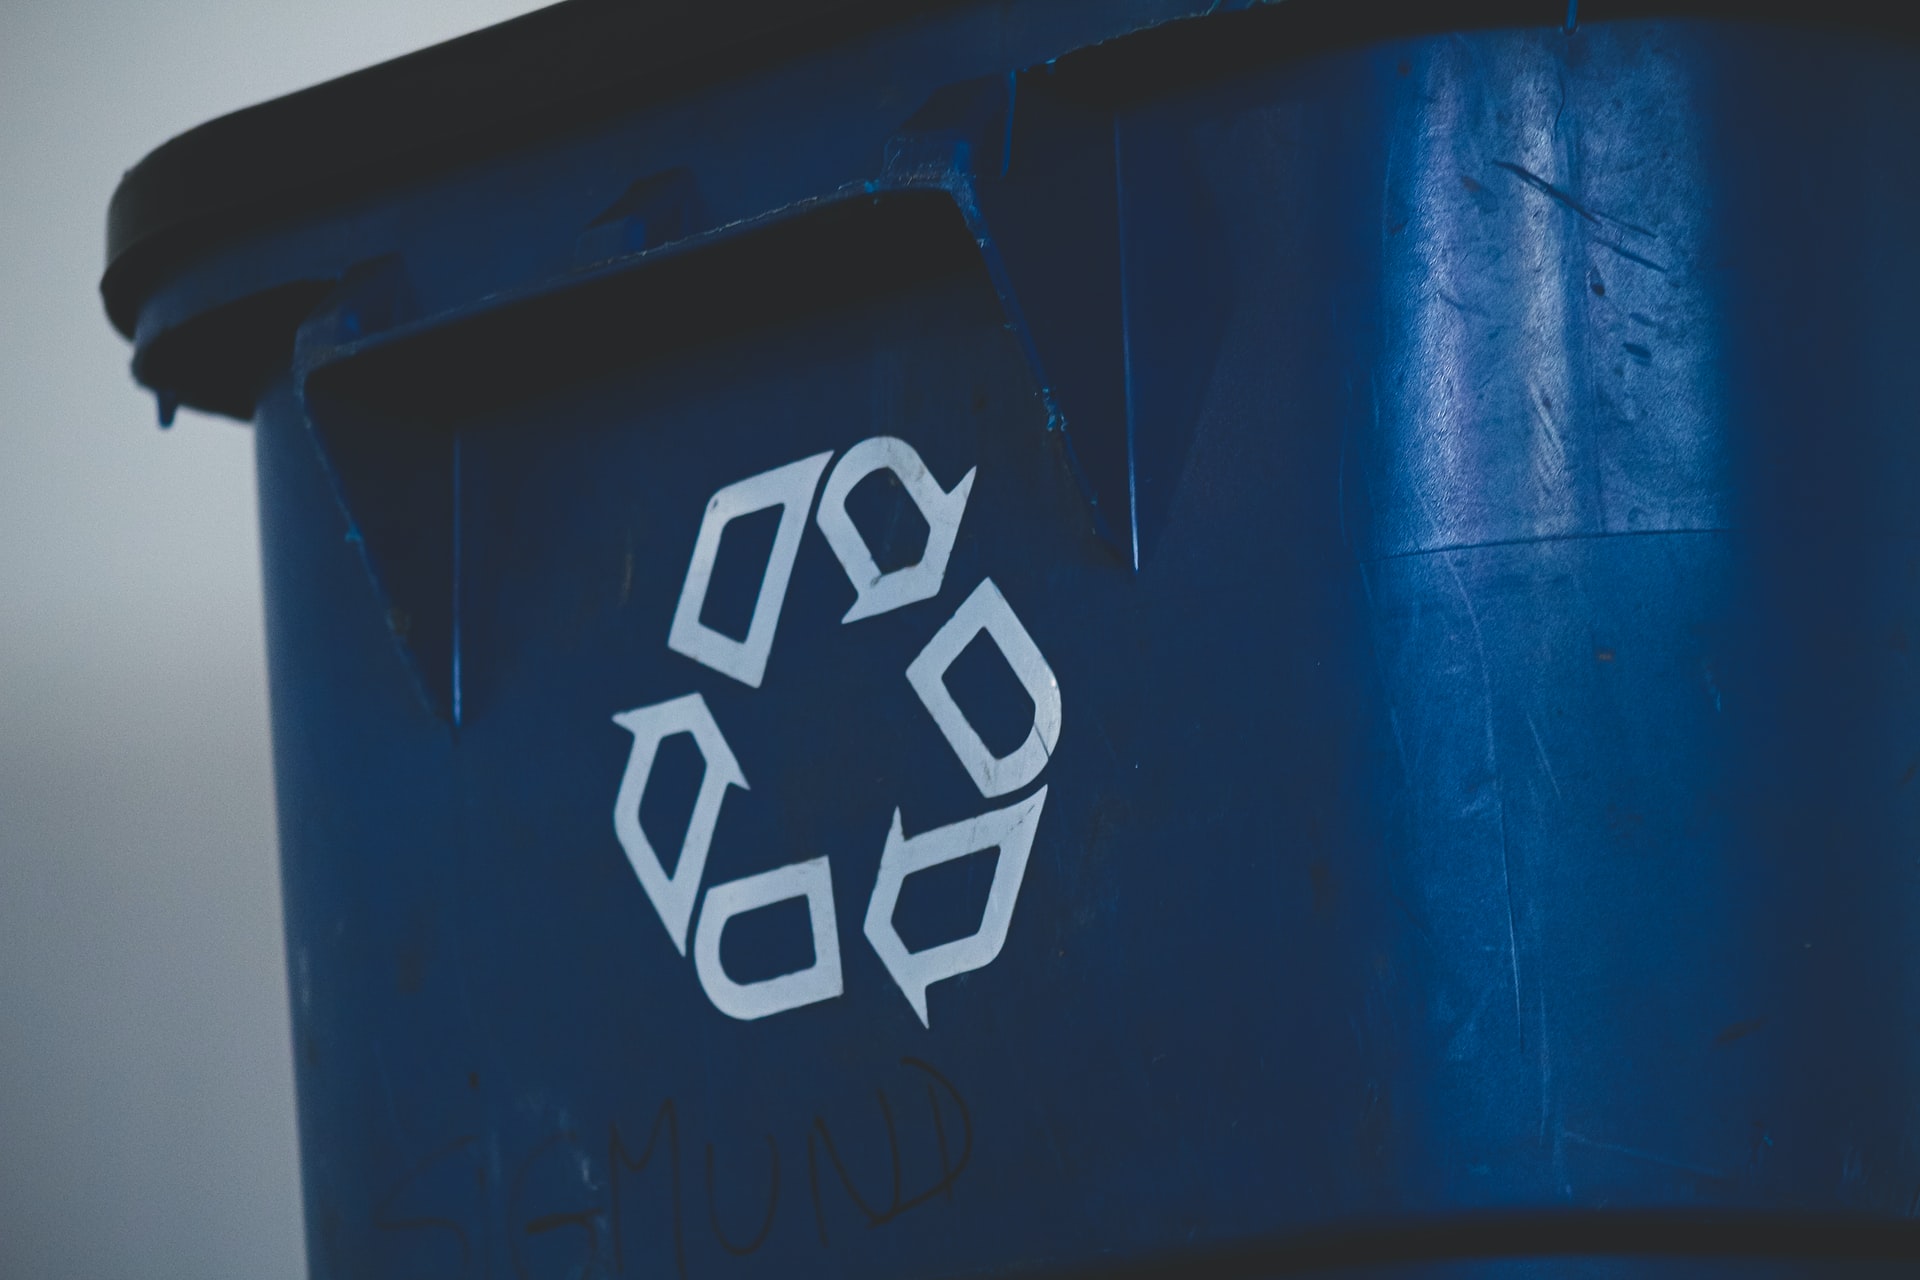 Close up photograph of the "recycle" symbol on a recycling bin